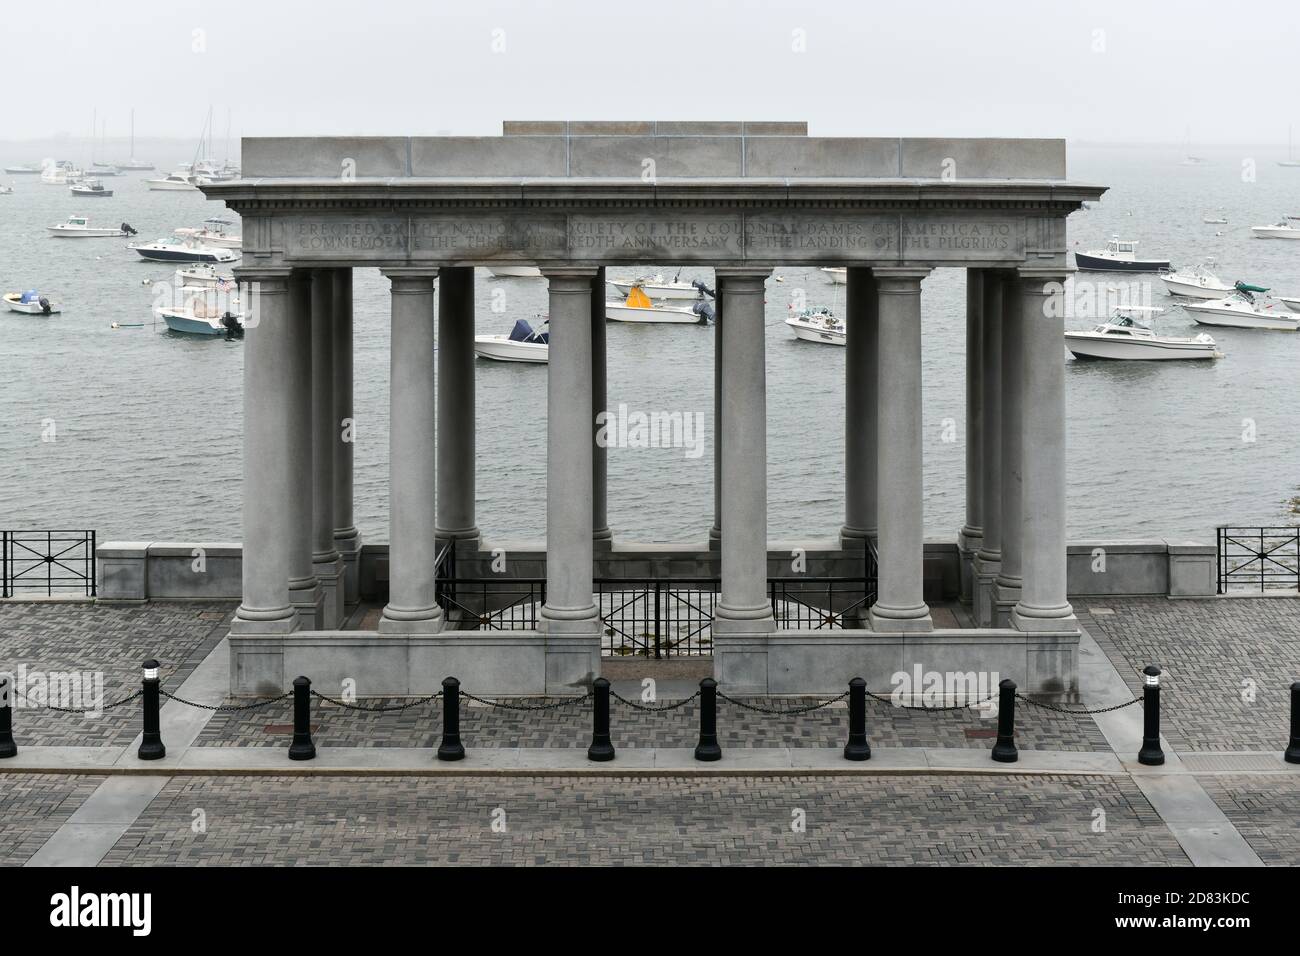 Plymouth, Massachusetts - July 3, 2020: The famous Plymouth Rock, the traditional site of disembarkation of the Mayflower pilgrims in the New World. Stock Photo